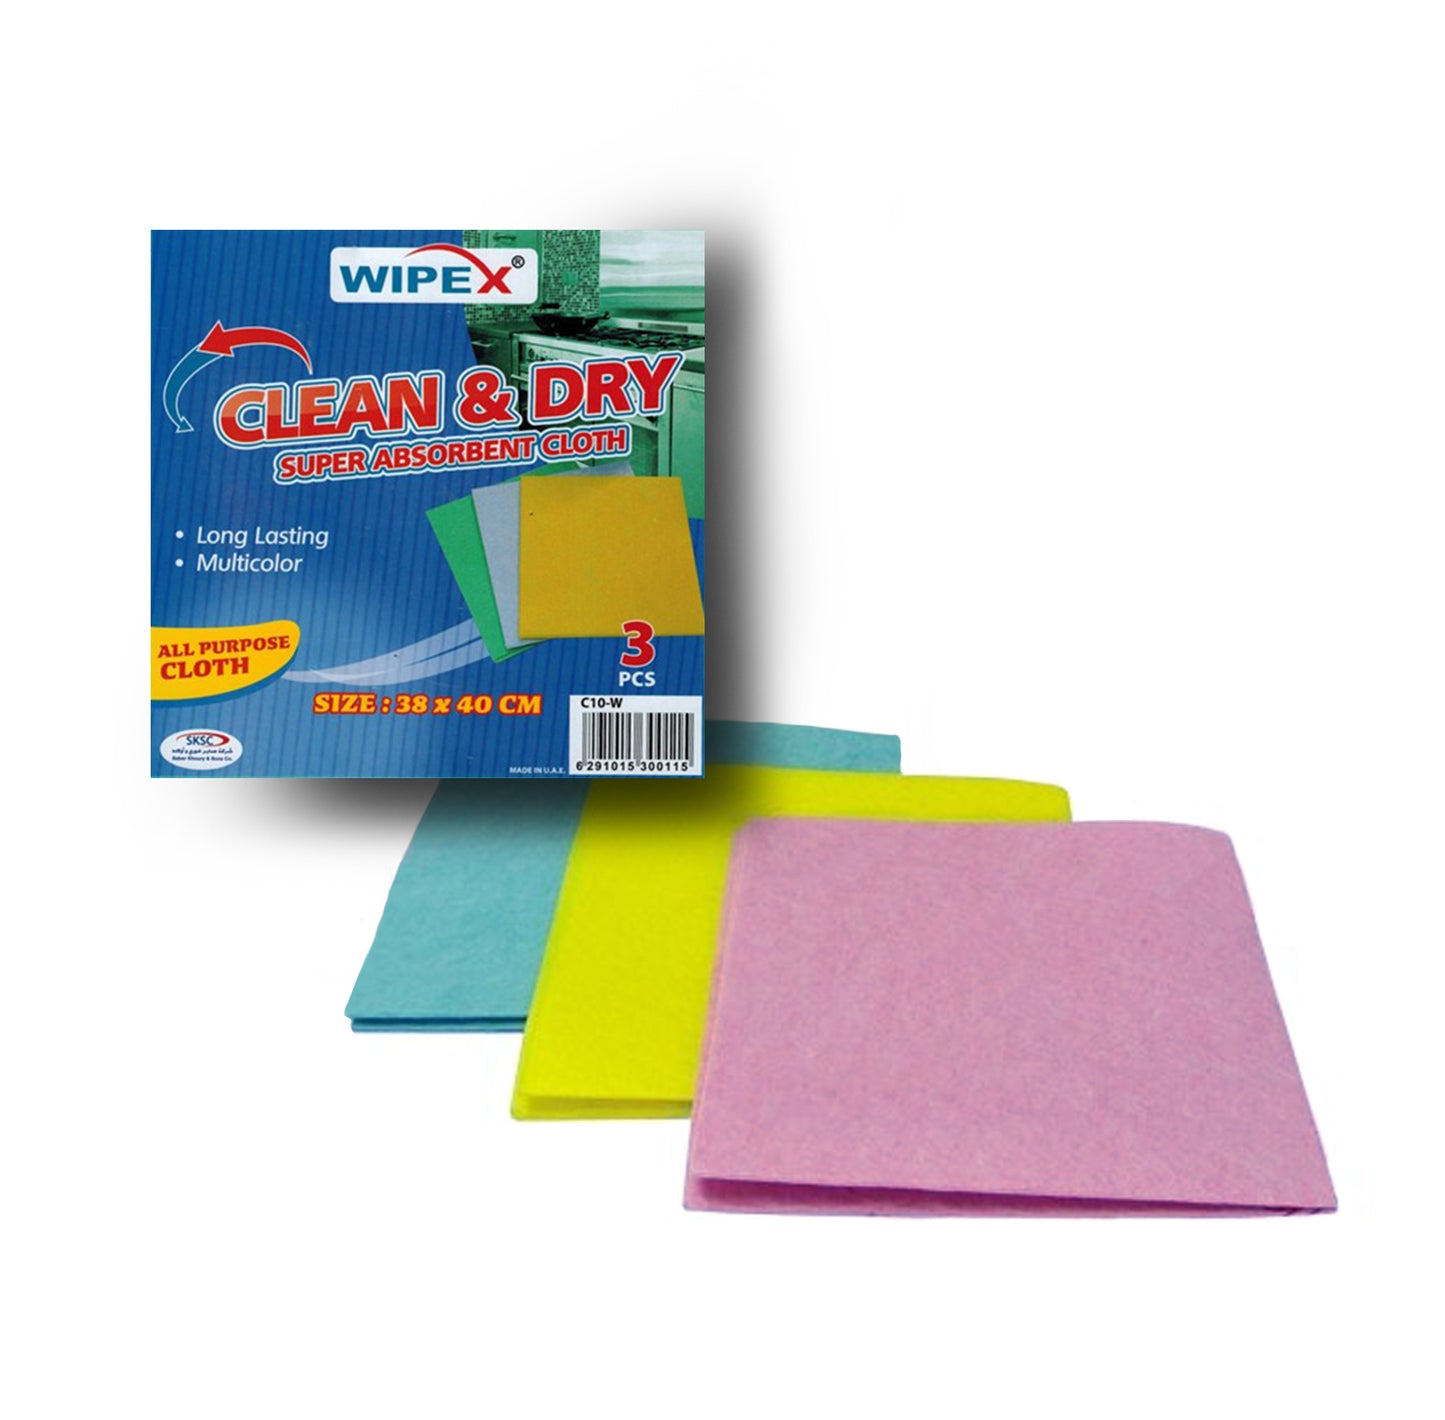 Clean and Dry Super Absorbent Cloth-Wipex